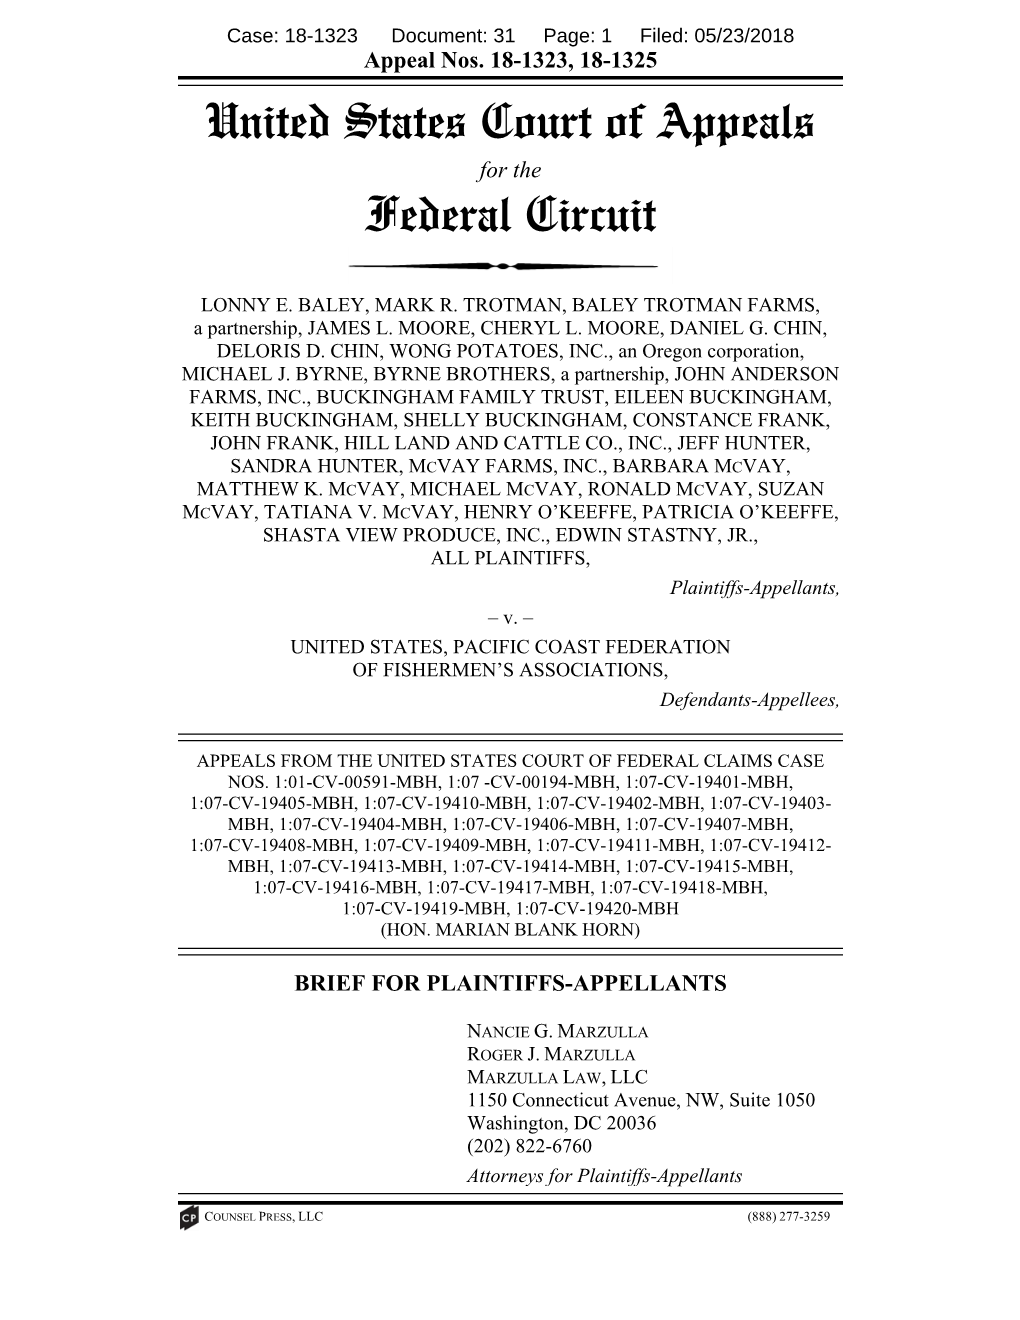 United States Court of Appeals Federal Circuit